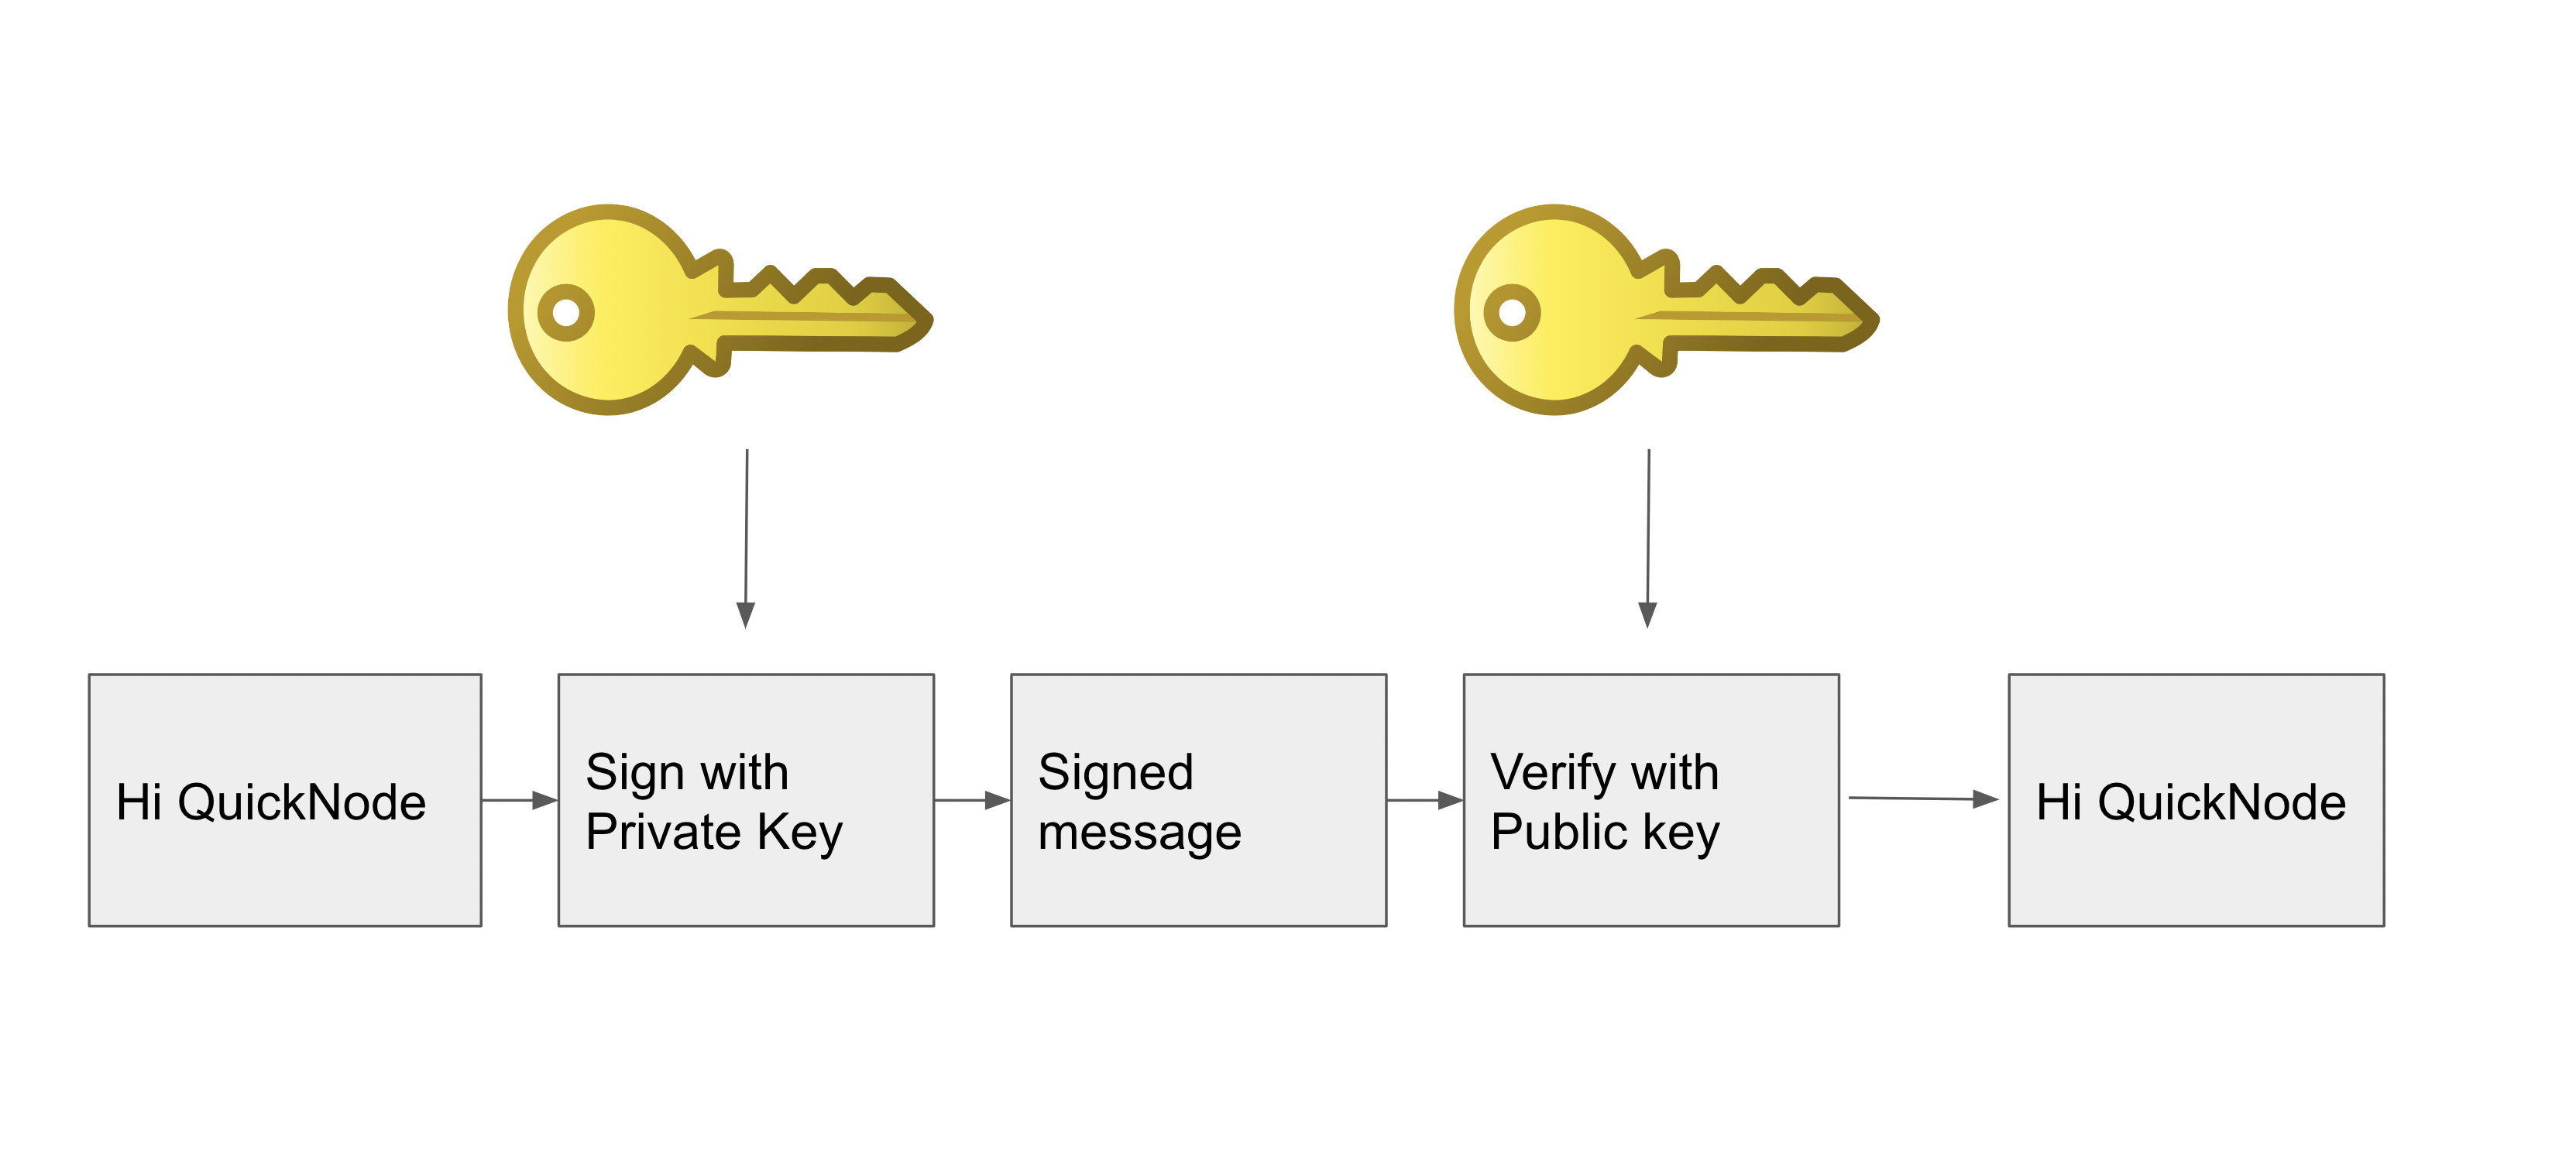 Image showing key-pair cryptography